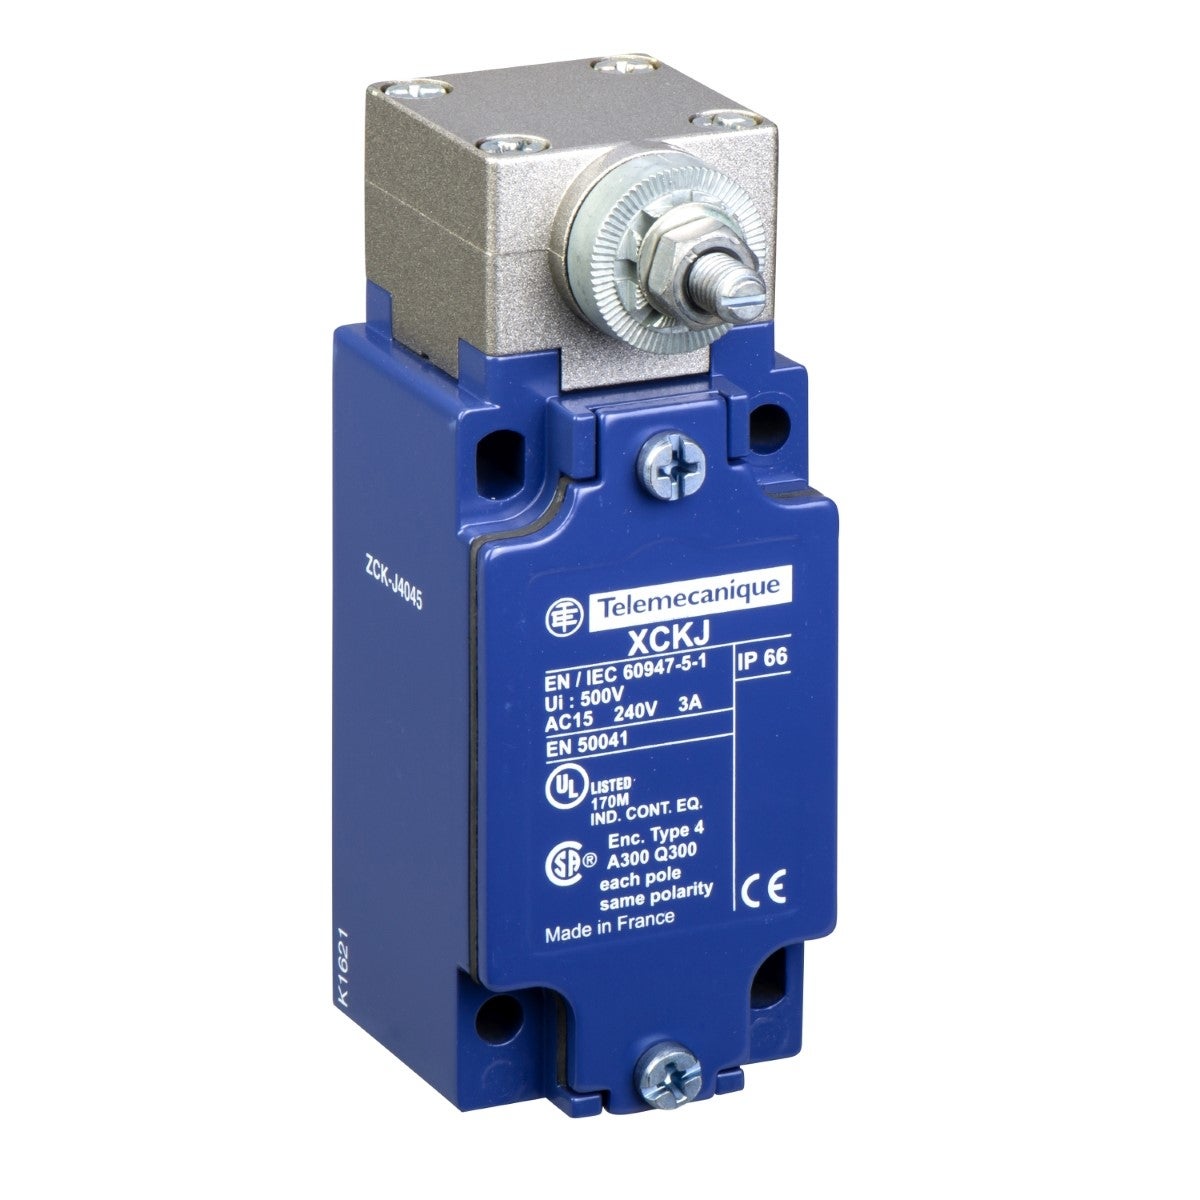 Limit switch body with spring return rotary head, Limit switches XC Standard, ZCKJ, w/o lever, fixed, 2C/O, snap, Pg13